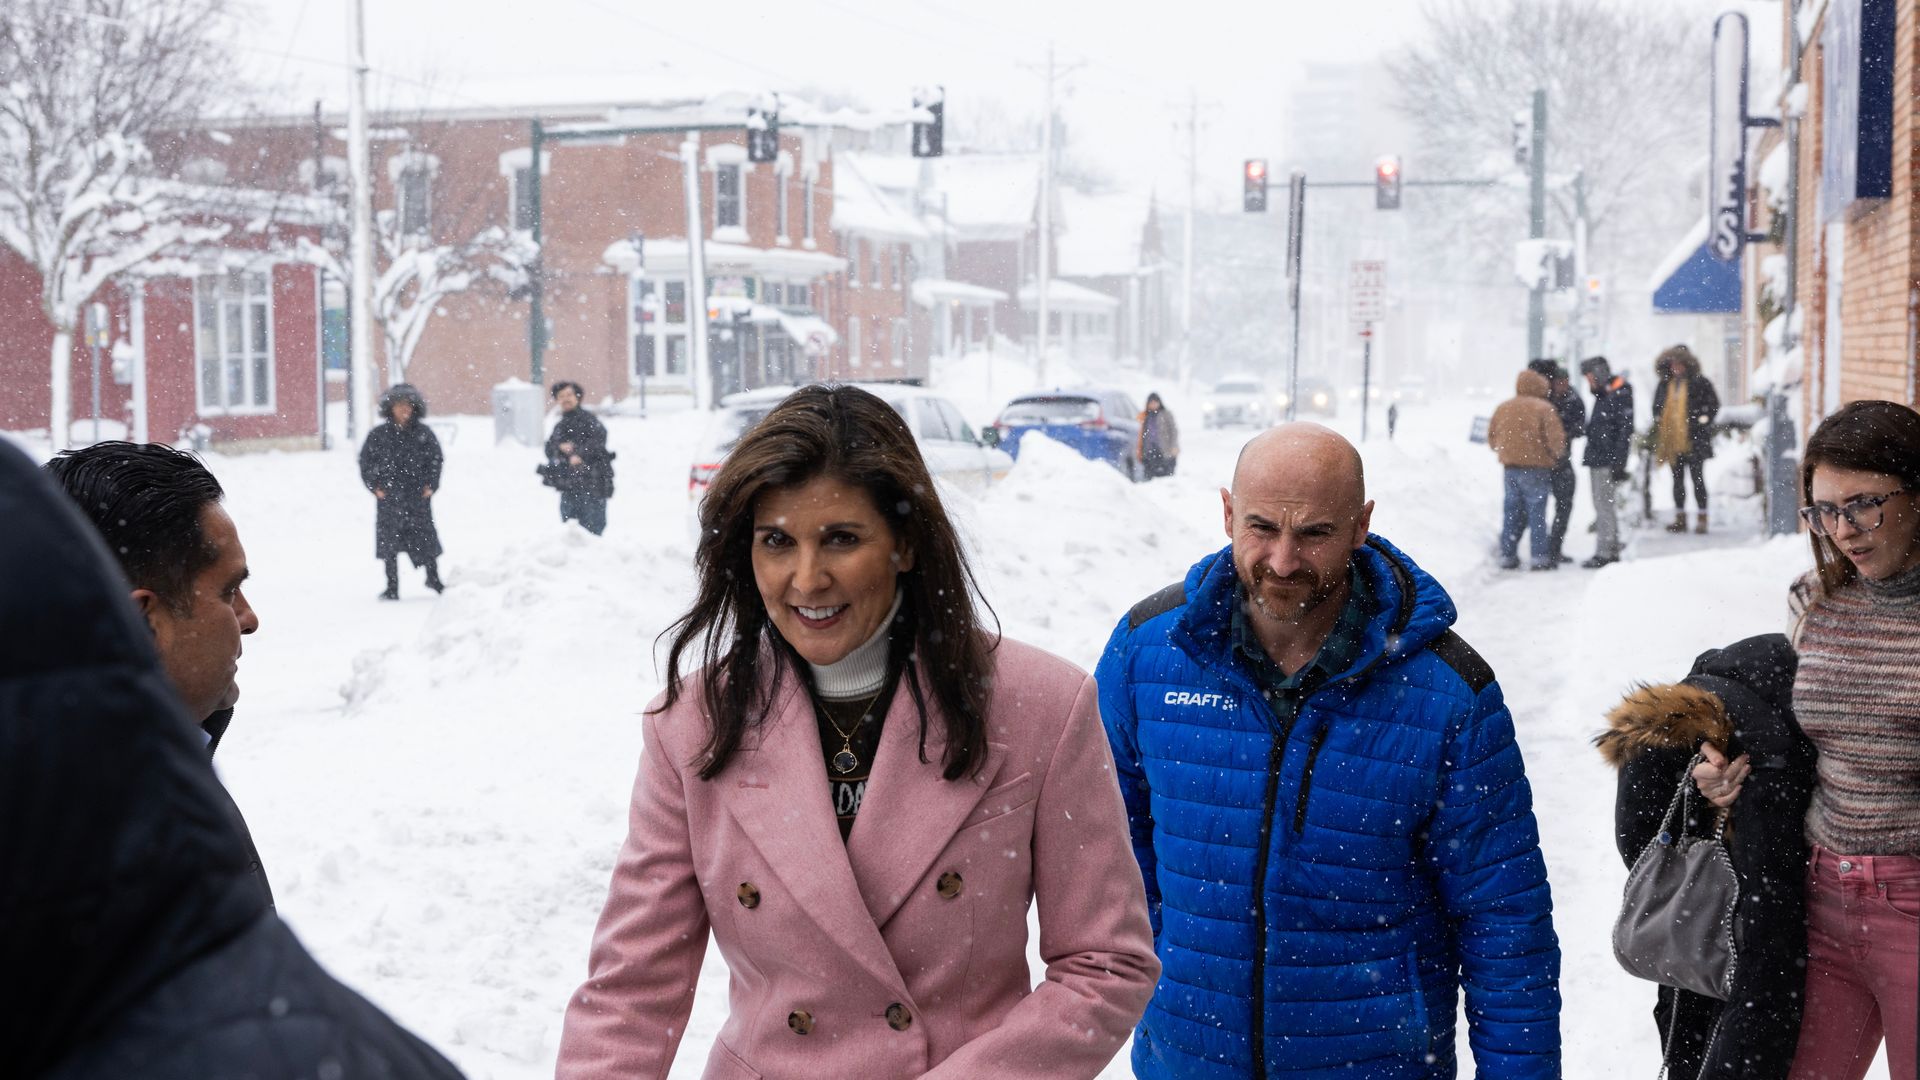 Nikki Haley campaigns in the snow wearing a pink coat.